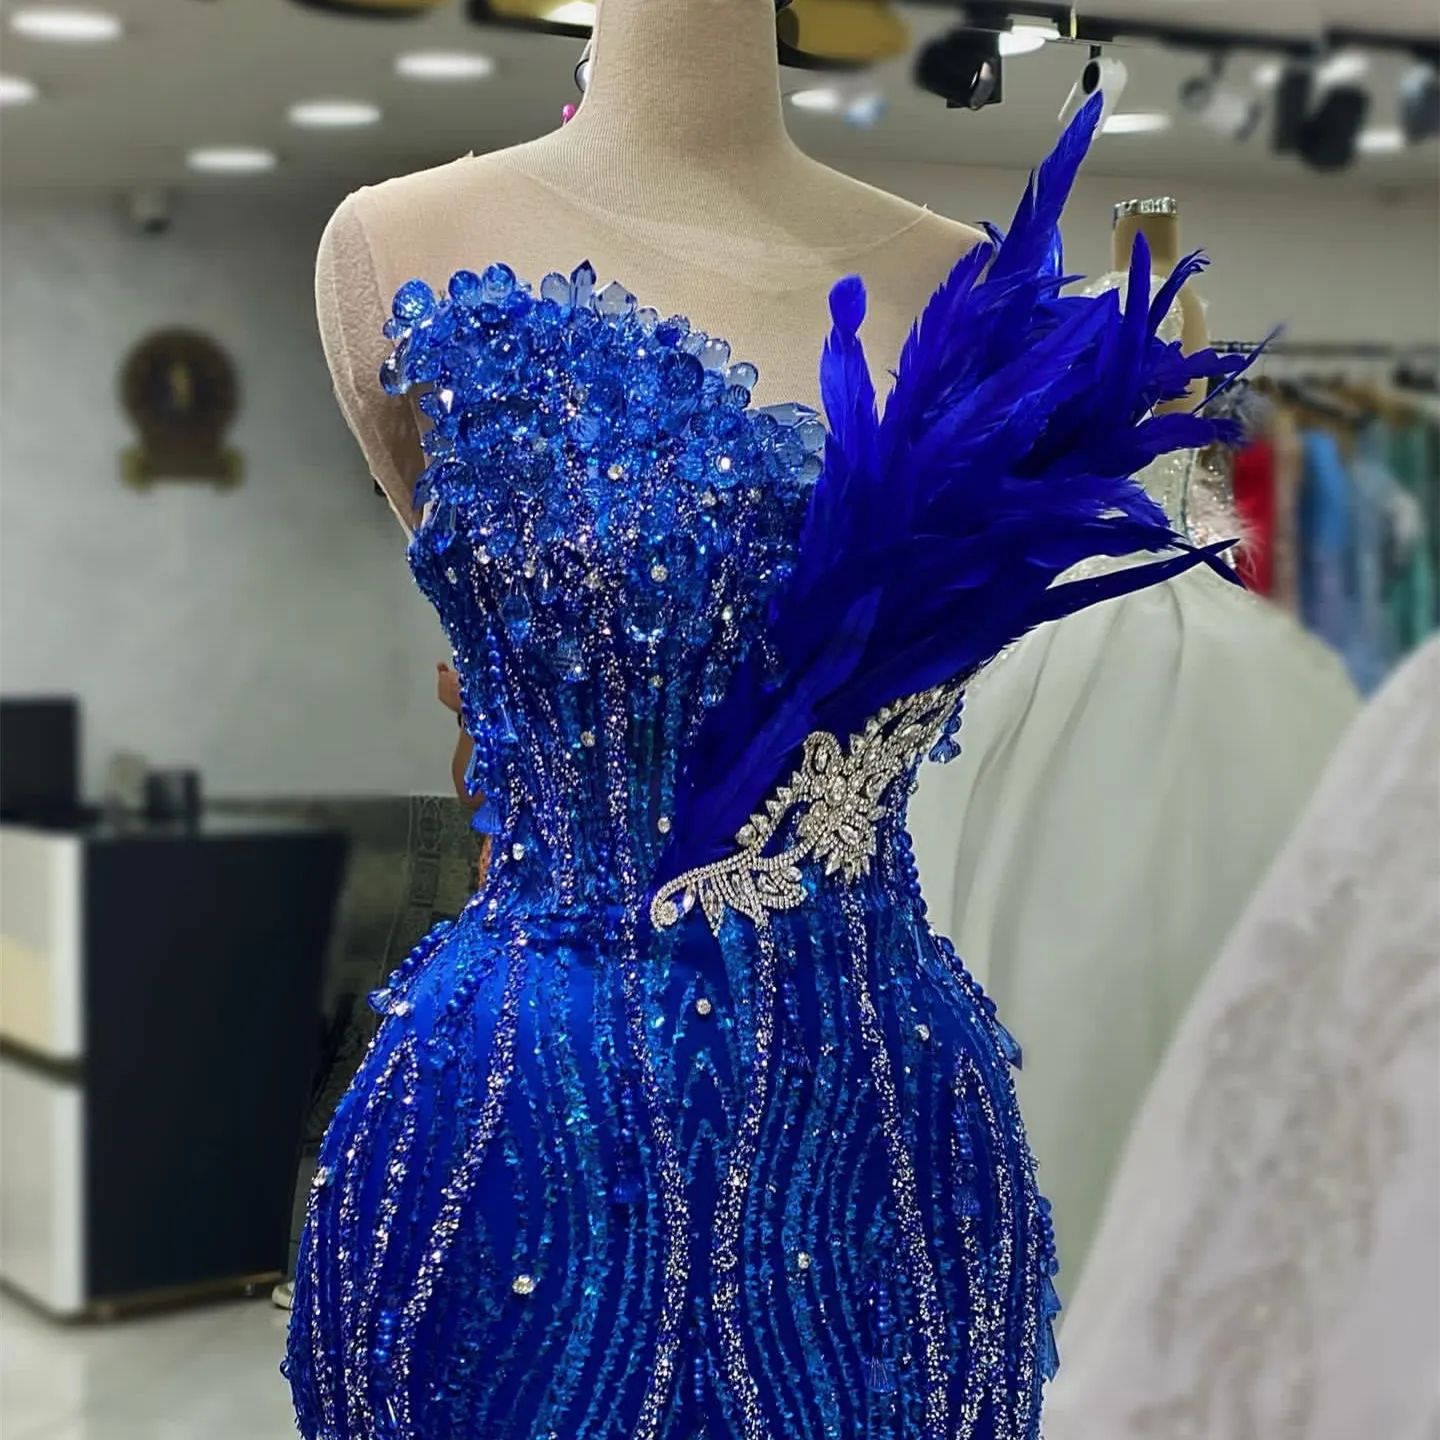 2023 Aso Ebi Arabic Mermaid Royal Blue Prom Dress Crystals Sequined Lace Evening Formal Party Second Reception Birthday Engagement Gowns Dresses Robe De Soiree ZJ24